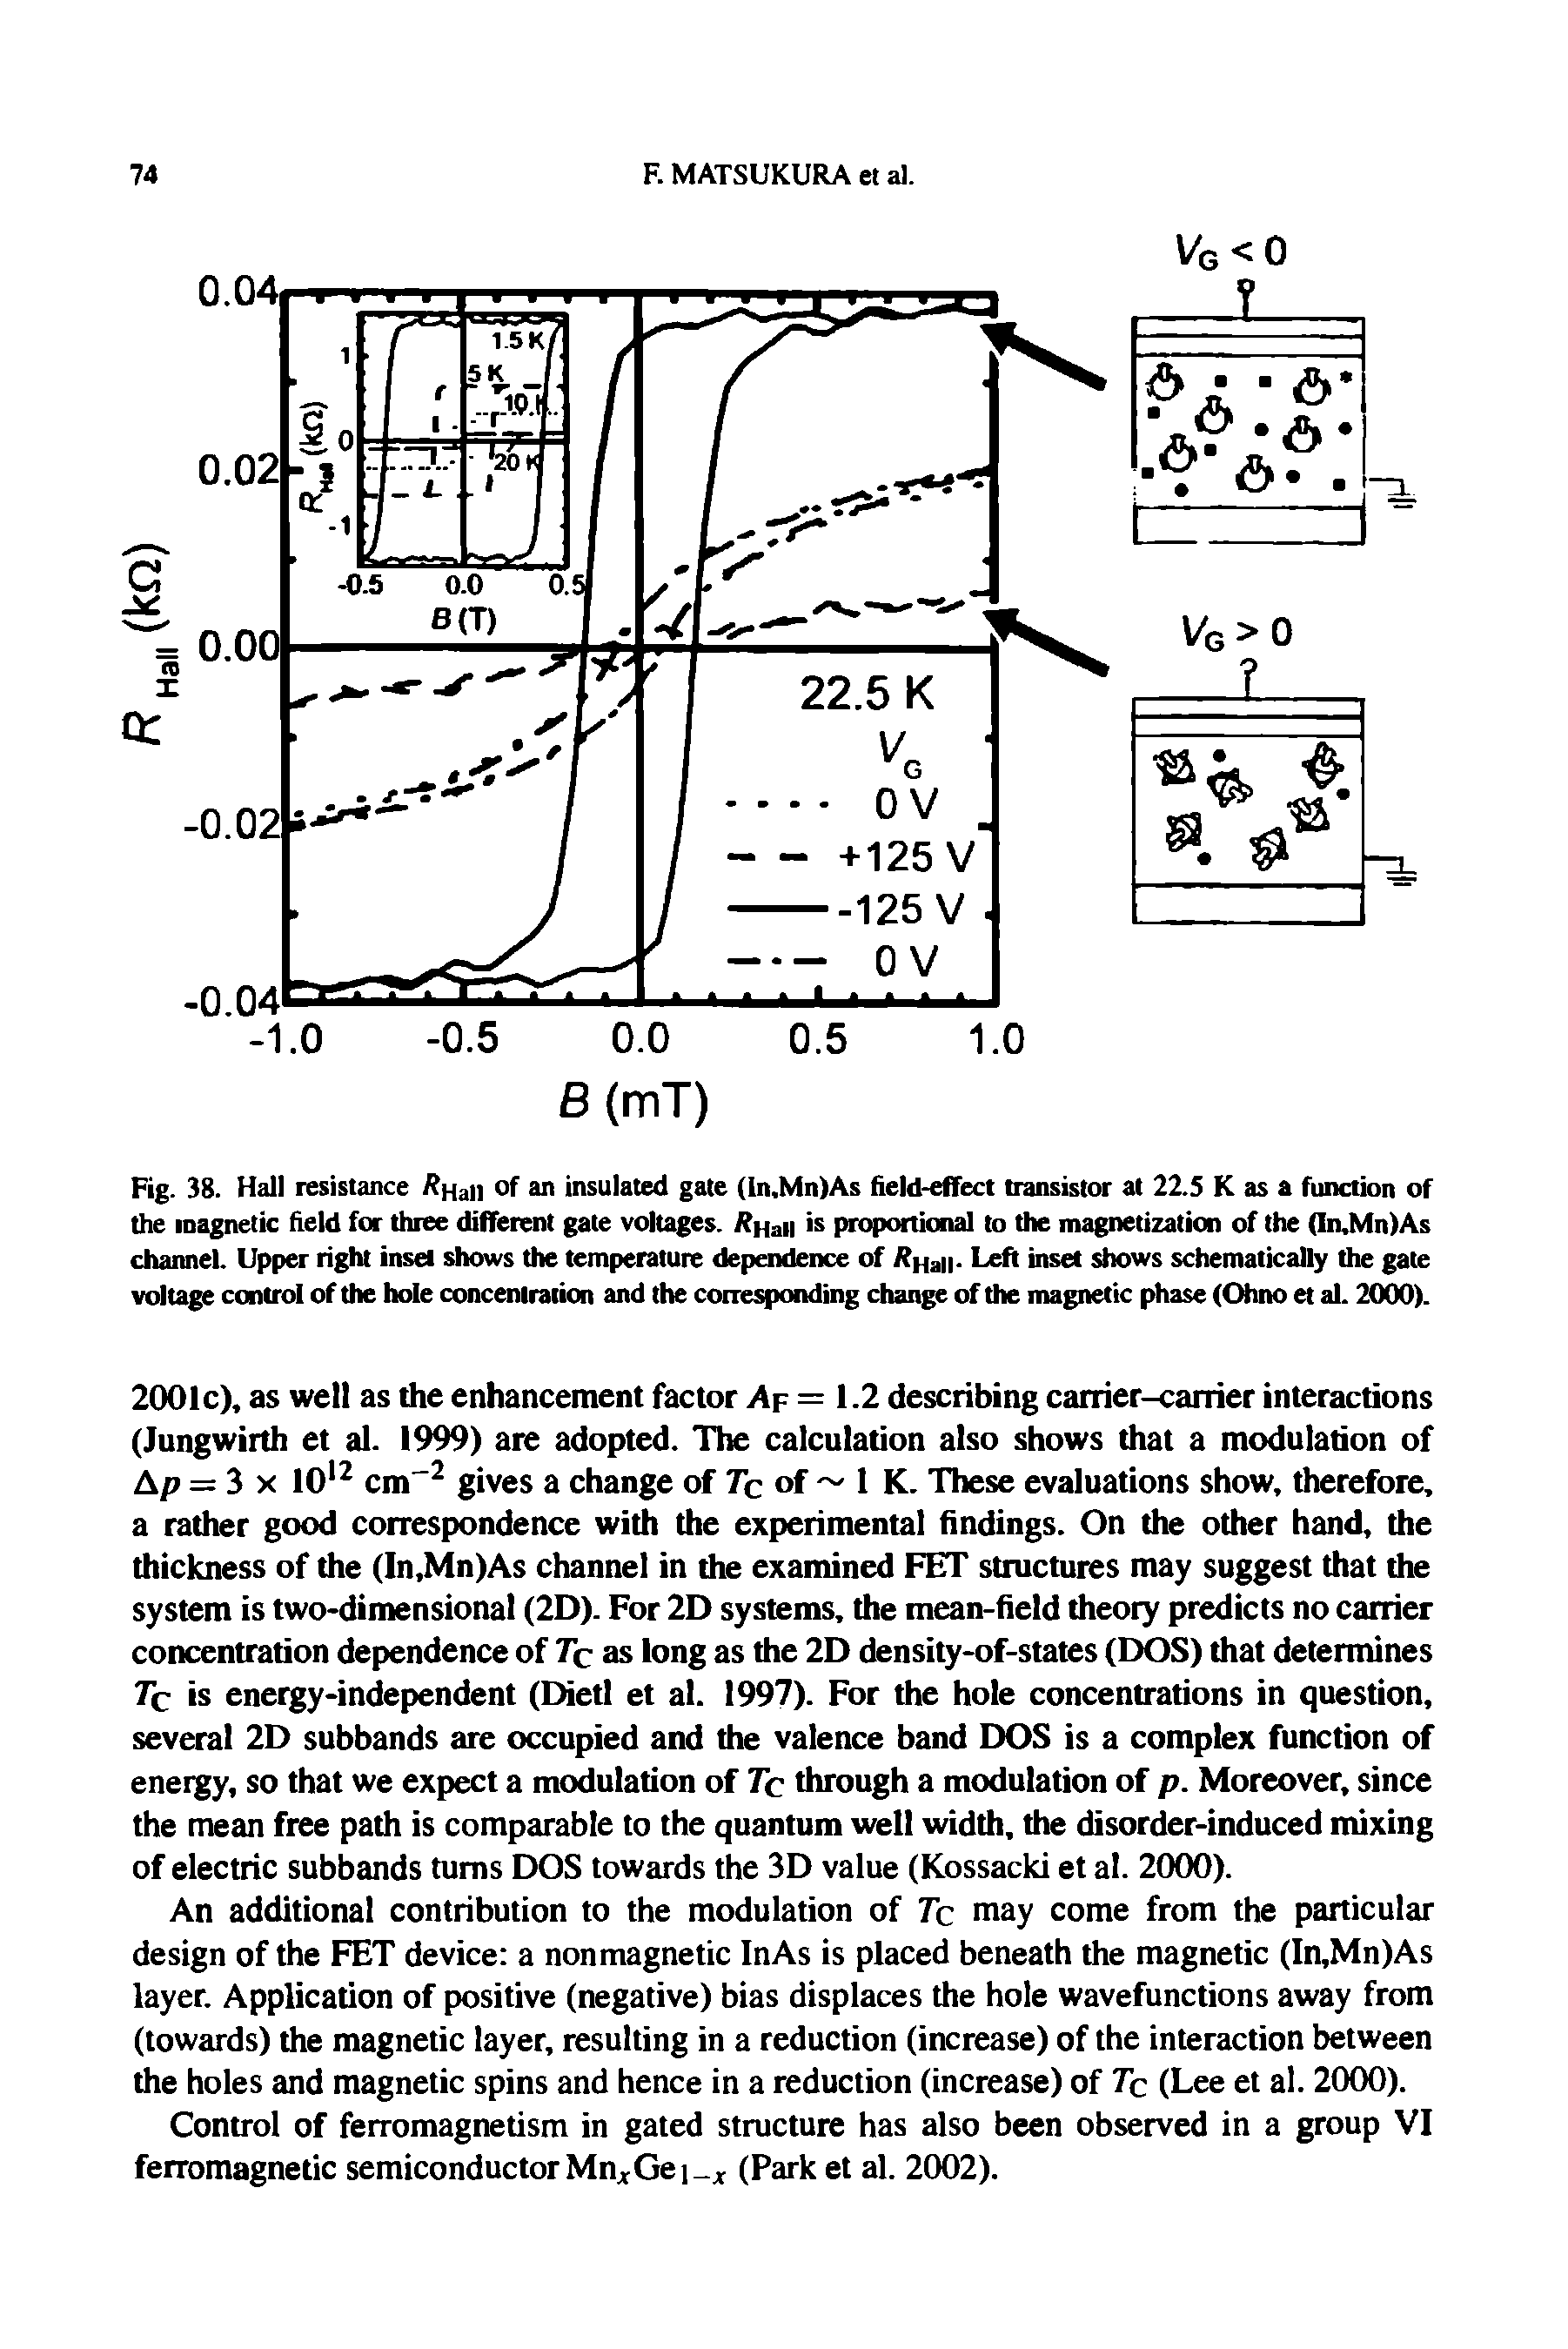 Fig. 38. Hall resistance Rnall of an insulated gate (ln.Mn)As field-effect transistor at 22.5 K as a function of the magnetic field for three different gate voltages. /tnaii s proportional to the magnetization of the (In.Mn)As channel. Upper right inset shows the temperature dependence of / Hall- Let inset shows schematically the gate voltage control of the hole concentration and the conesponding change of the magnetic phase (Ohno et al. 2000).